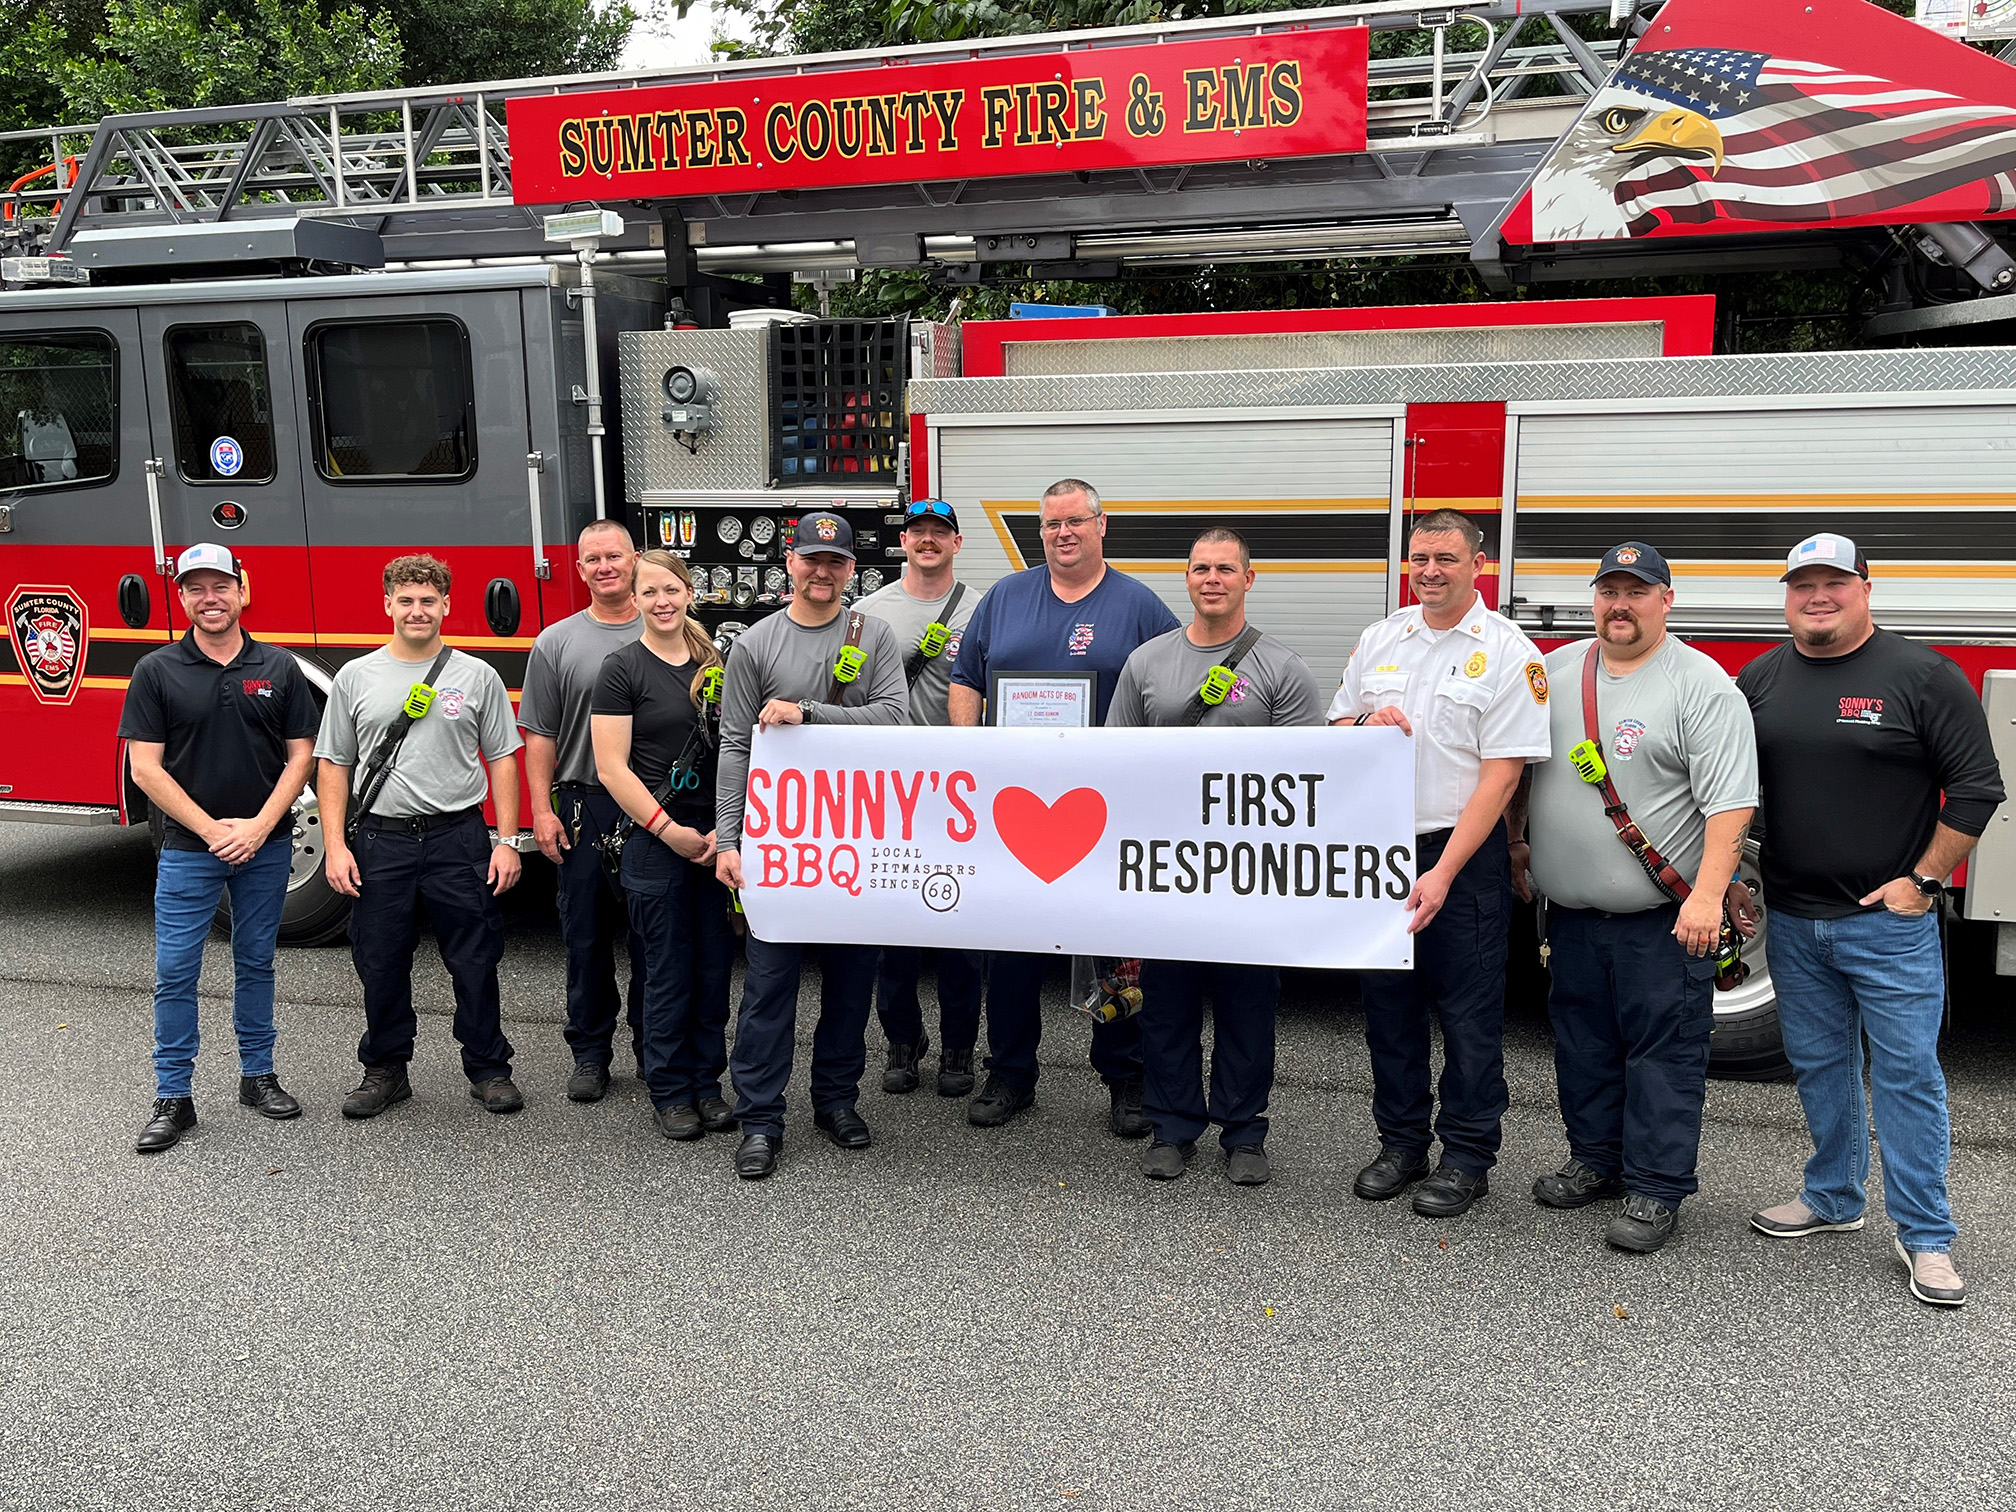 Sonny's BBQ team stands with First Responders in Sumter County to say thank you.